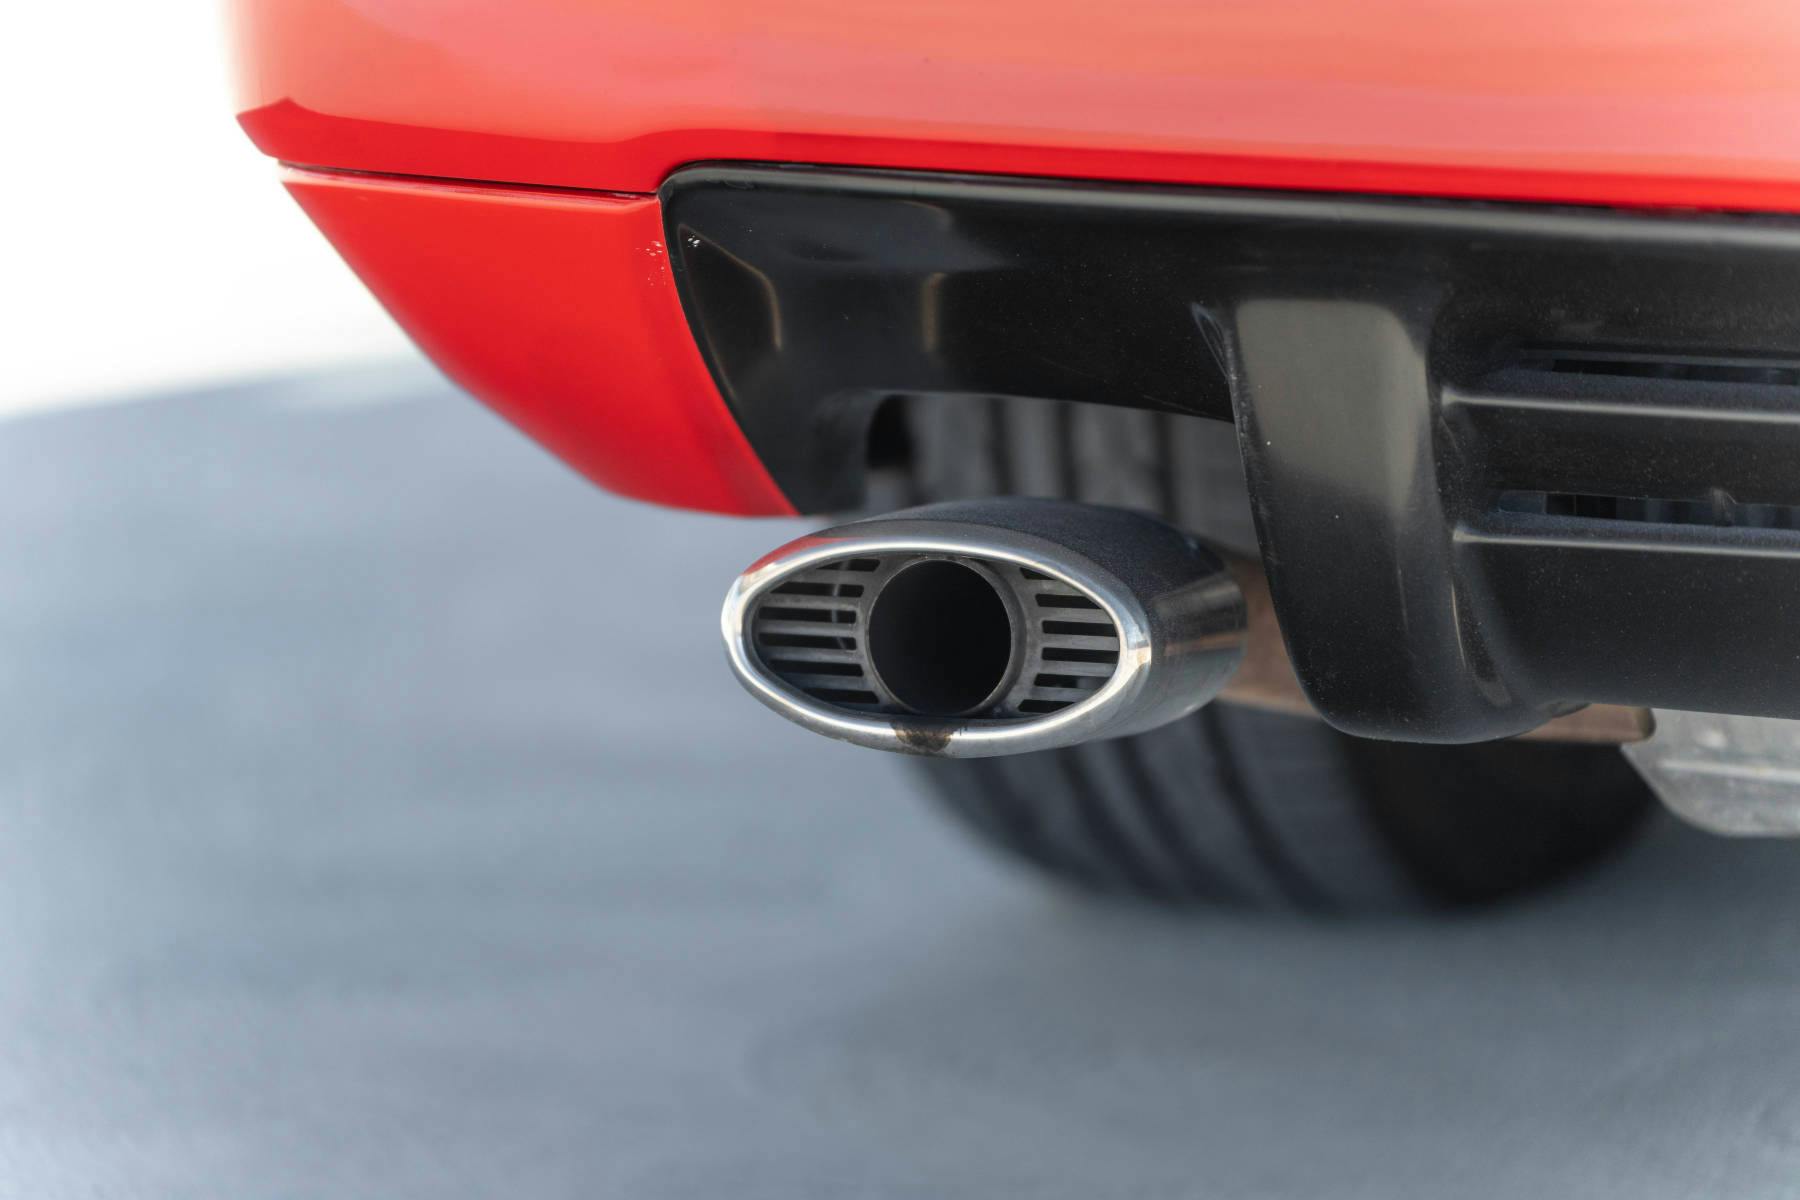 1991 Acura NSX red tailpipe